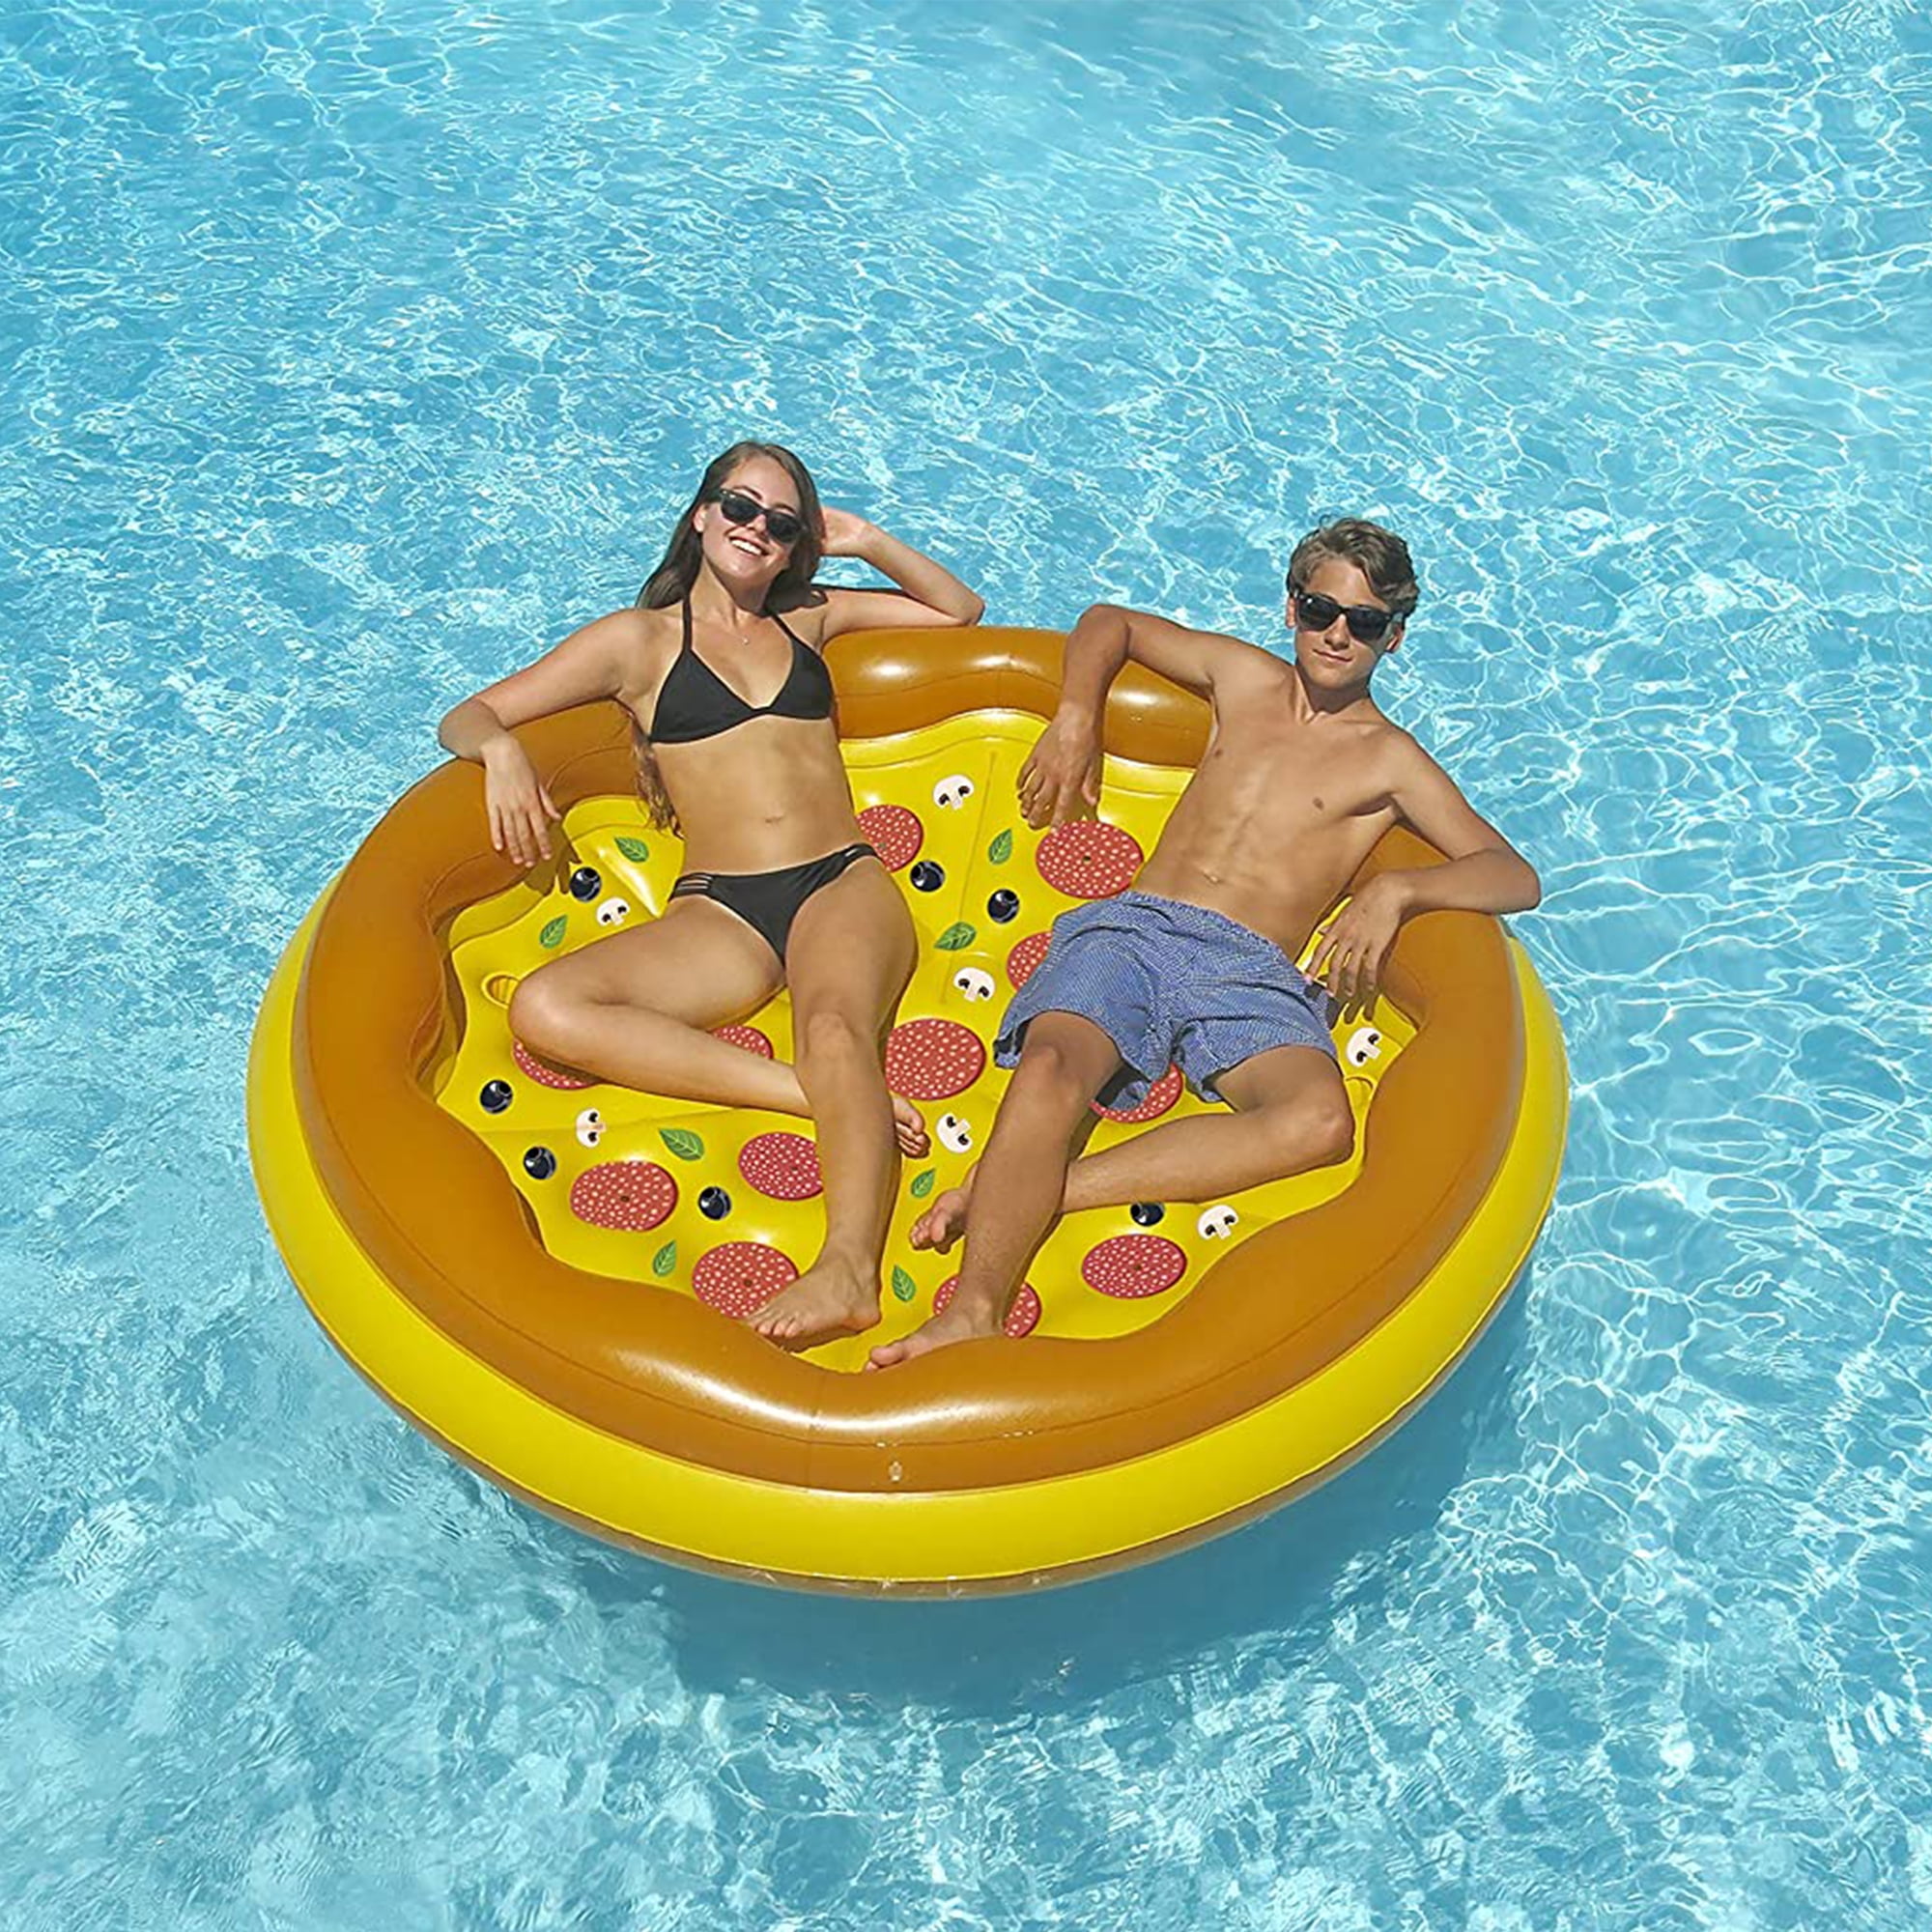 Peacock Giant Inflatable Round Swim Ring Pool Float Beach Swimming Lounger Row 